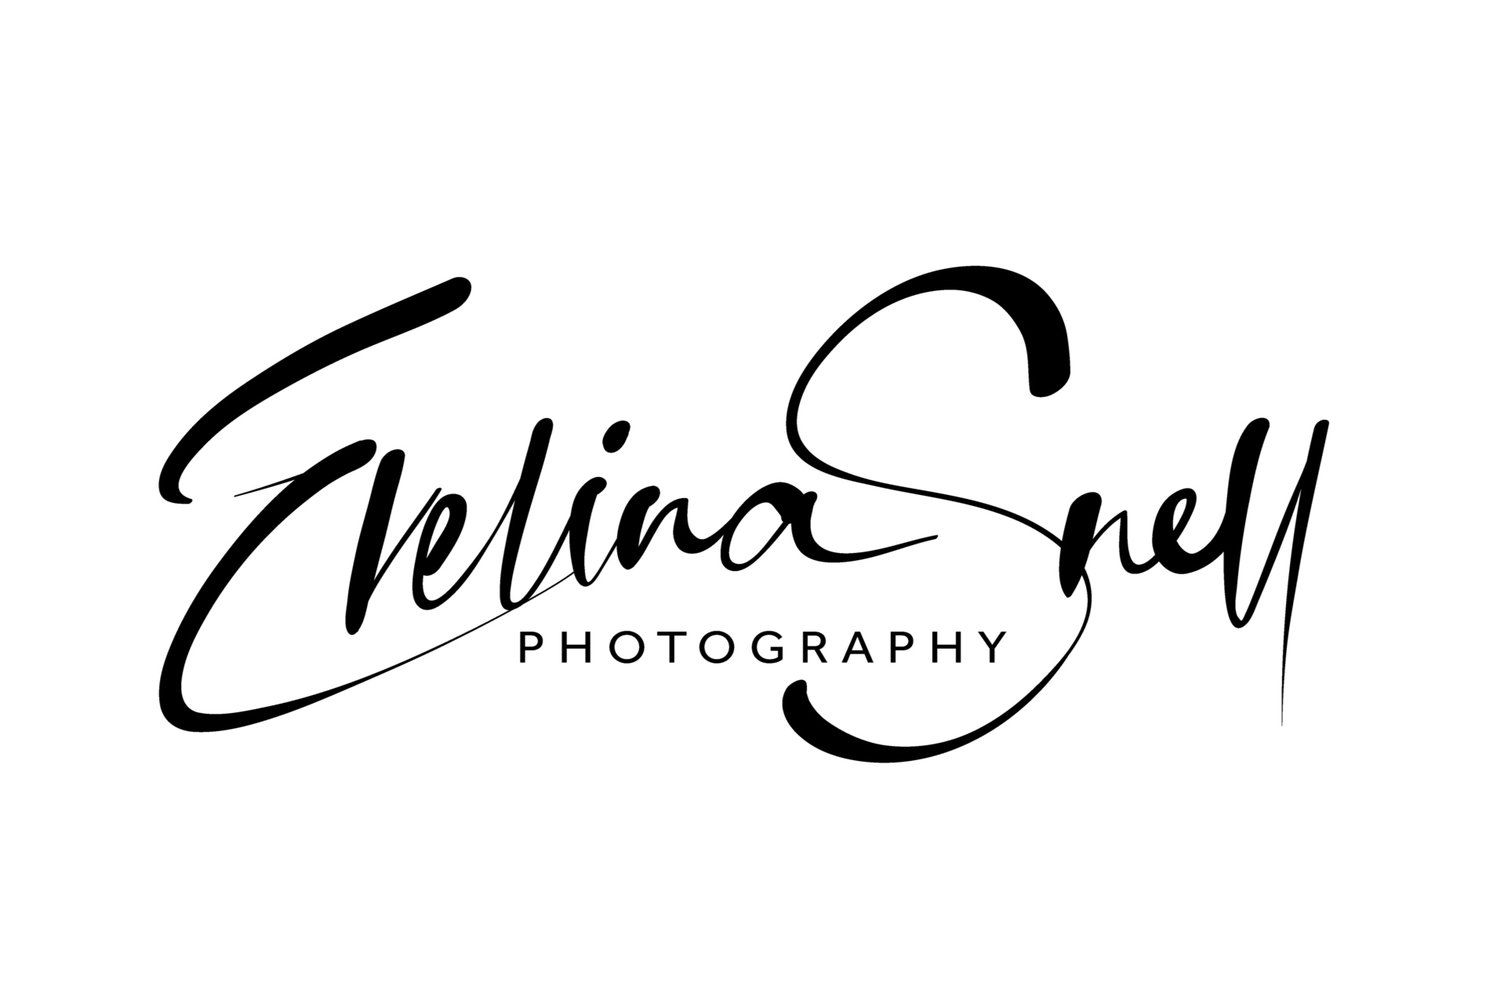 Evelina Snell Photography